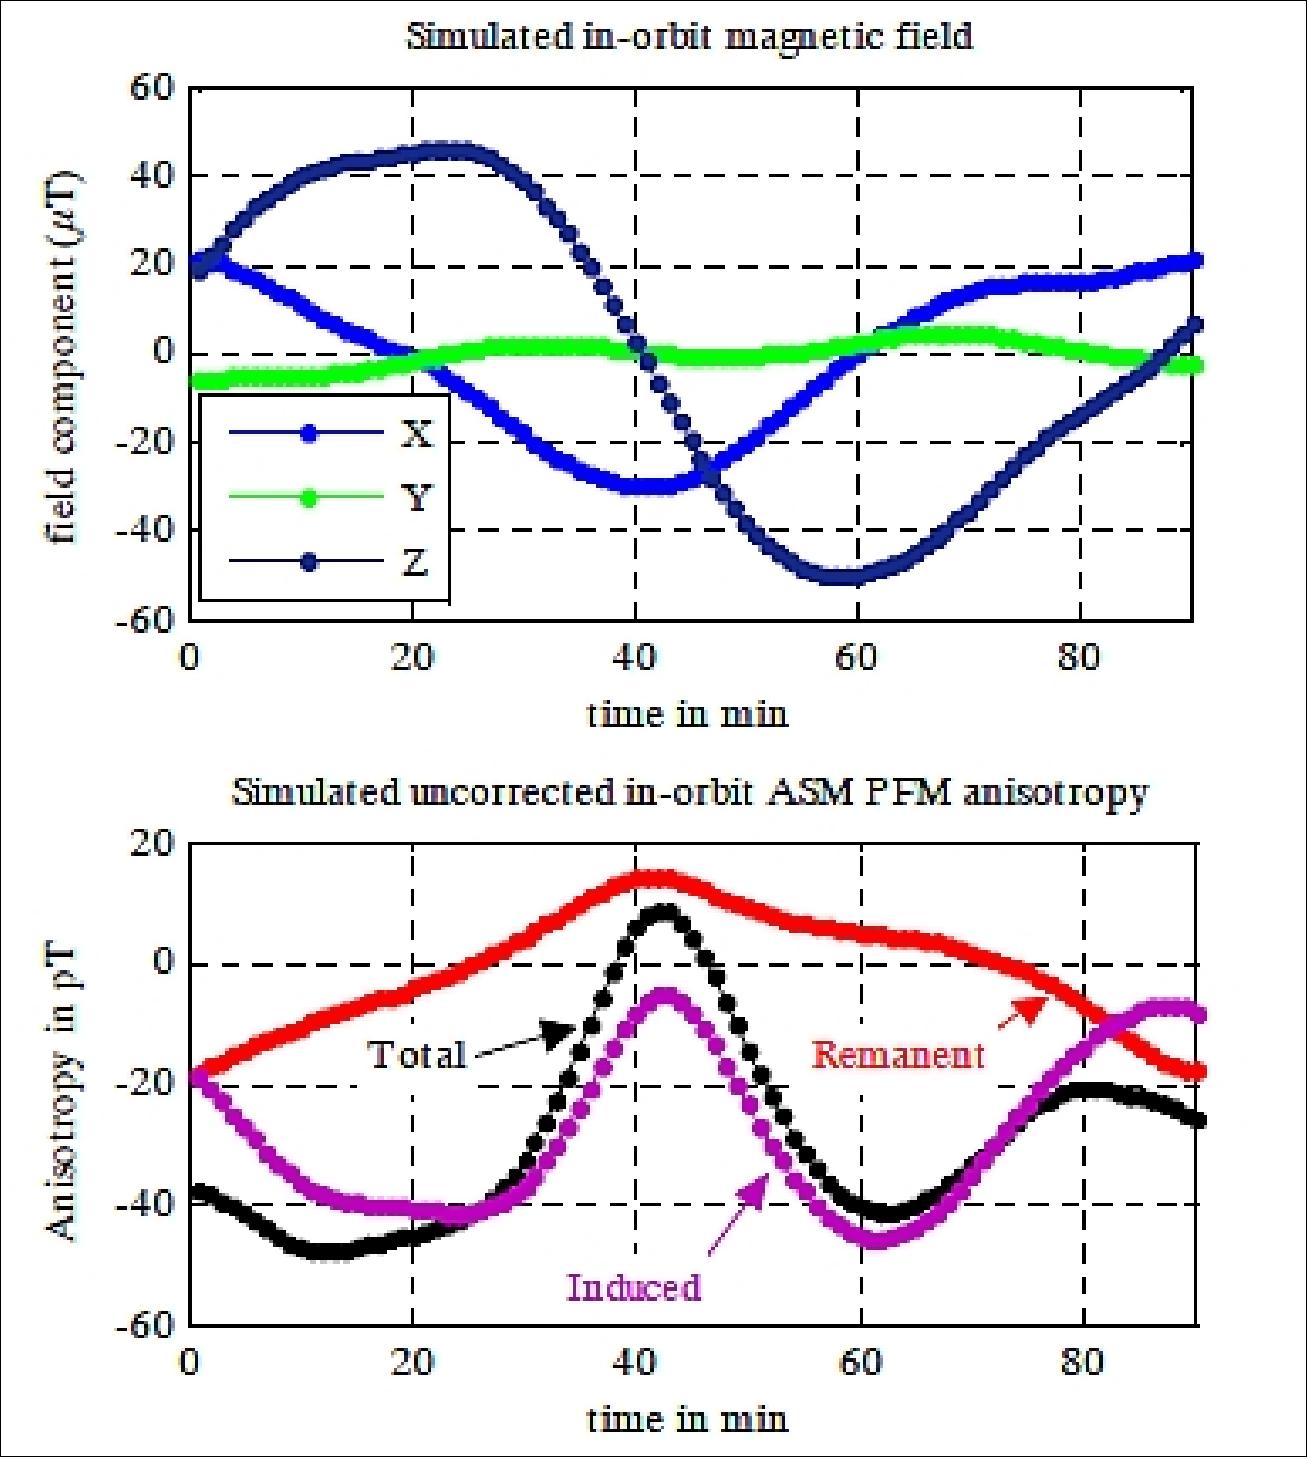 Figure 115: Residual anisotropy for the in orbit ASM configuration (image credit: LETI, Ref.146)